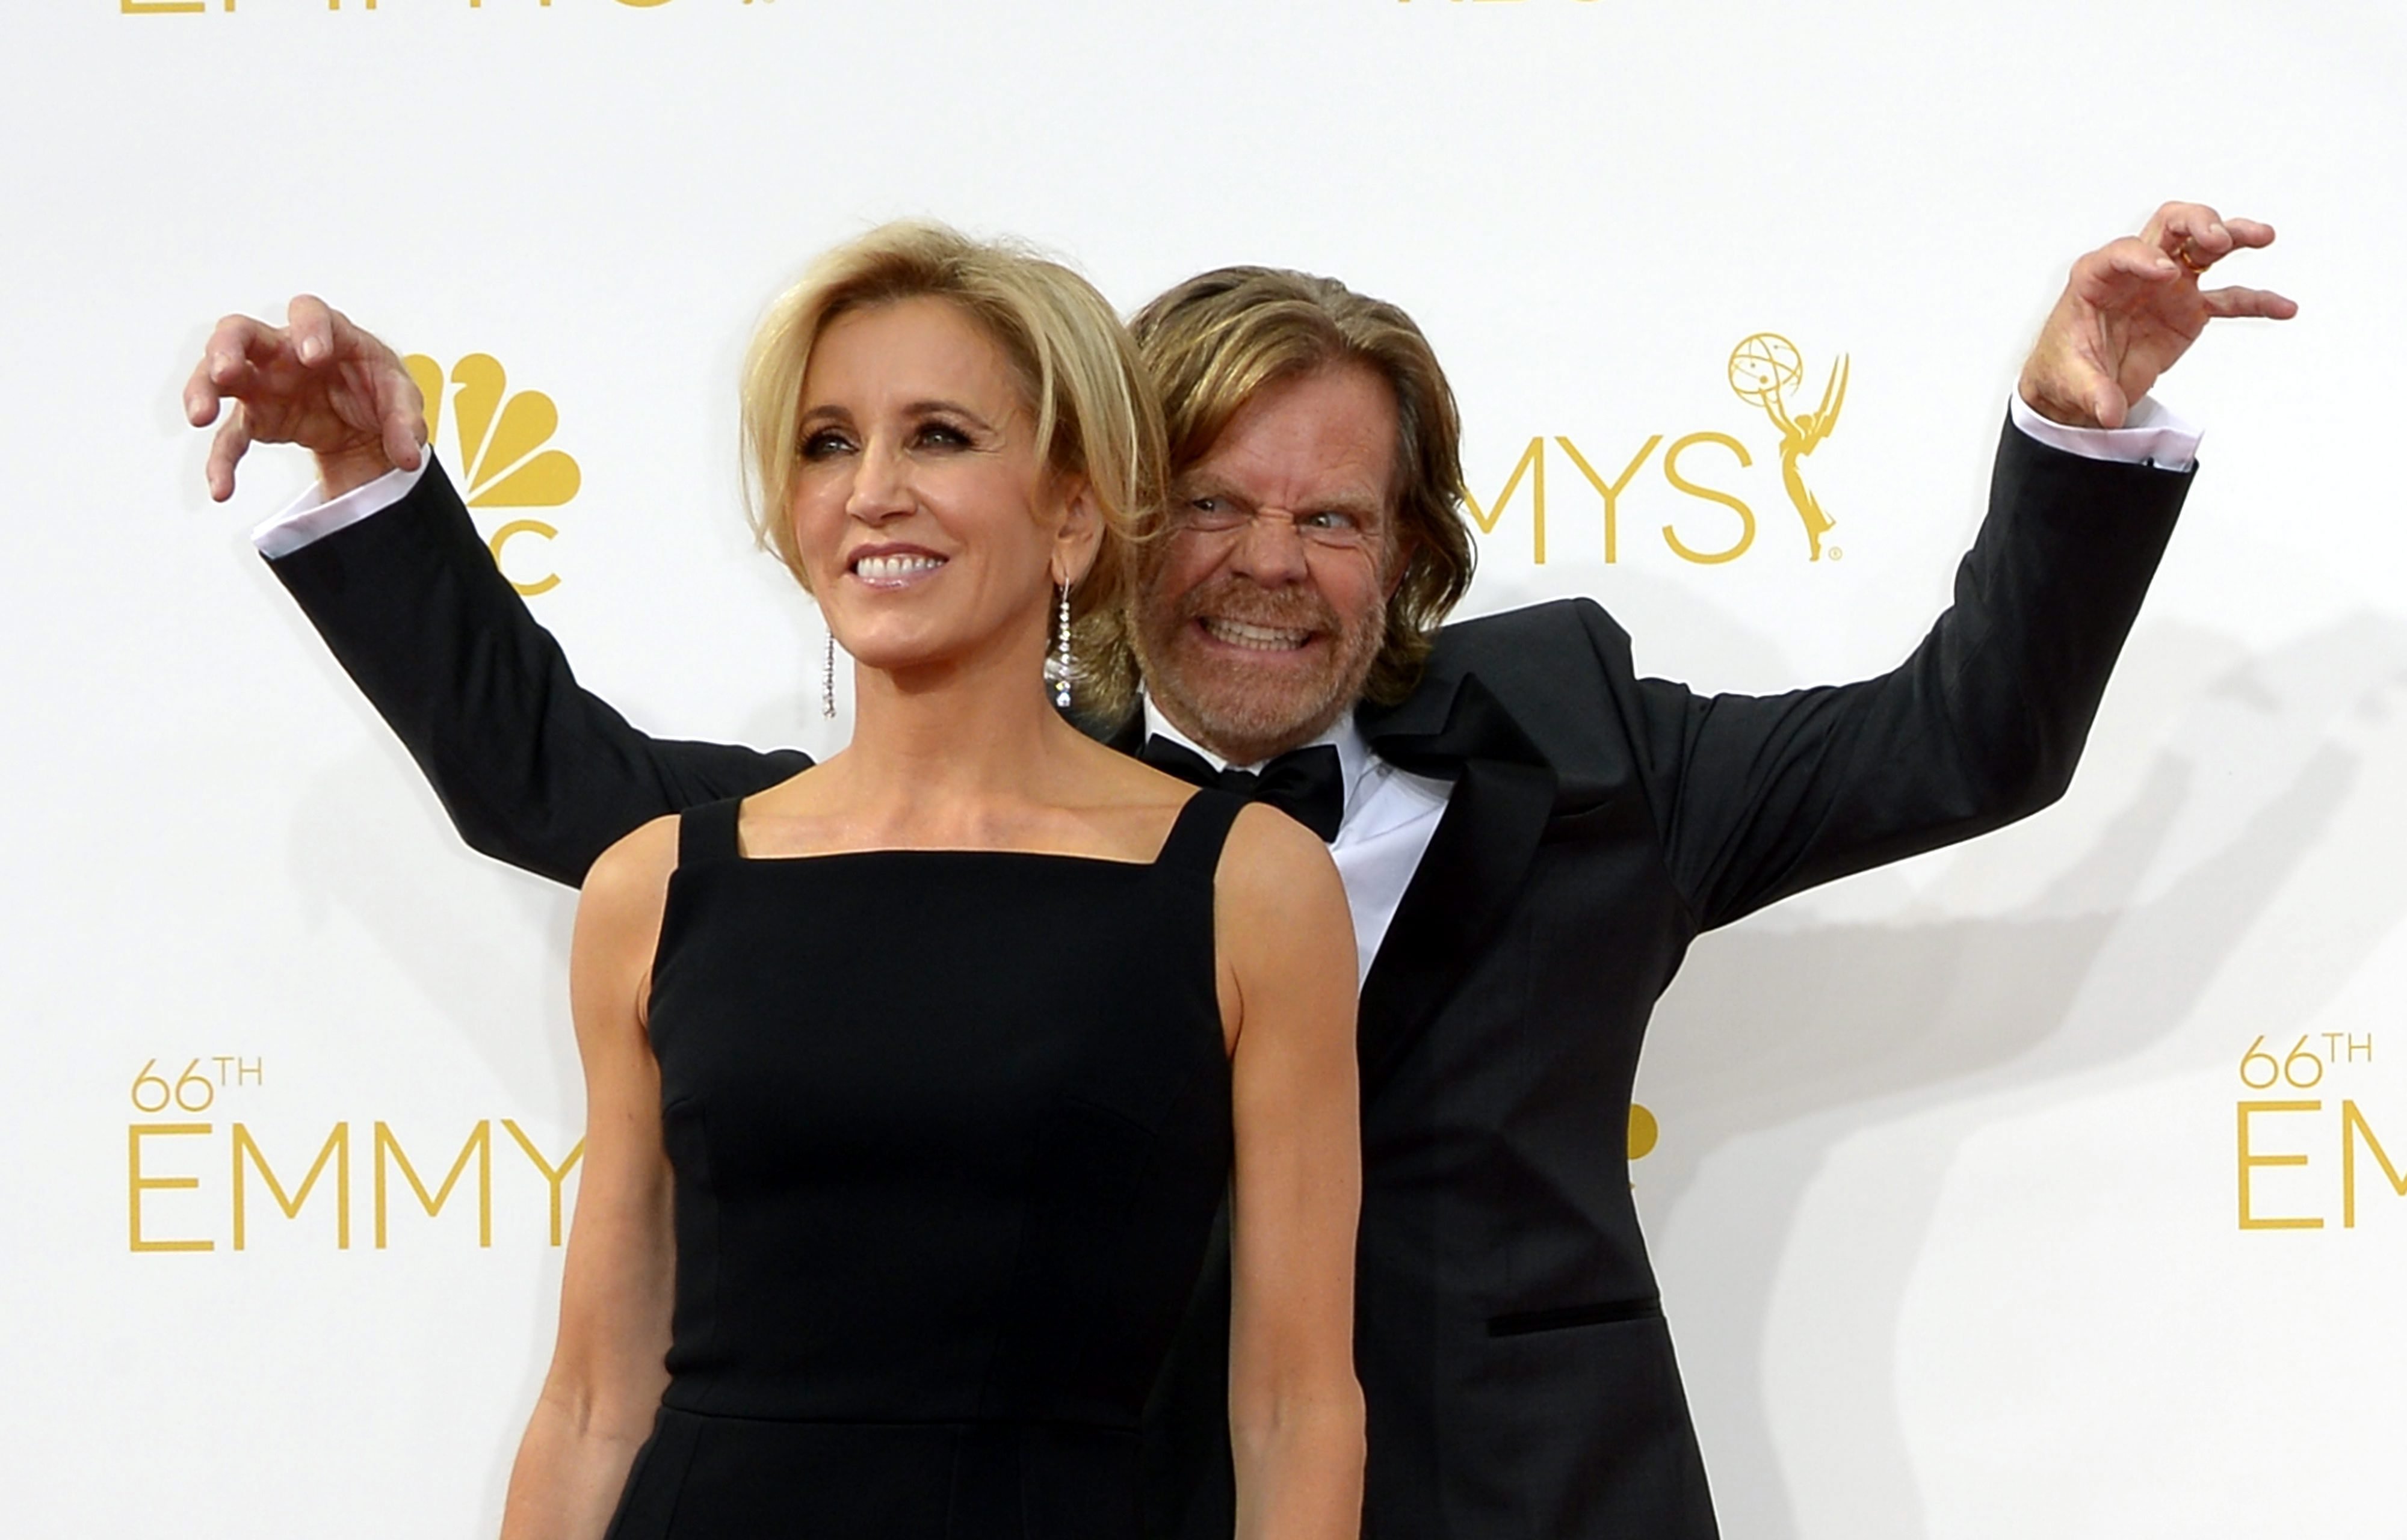 William H. Macy and Felicity Huffman  arrive for the 66th annual Primetime Emmy Awards held at the Nokia Theatre in Los Angeles, California, USA.